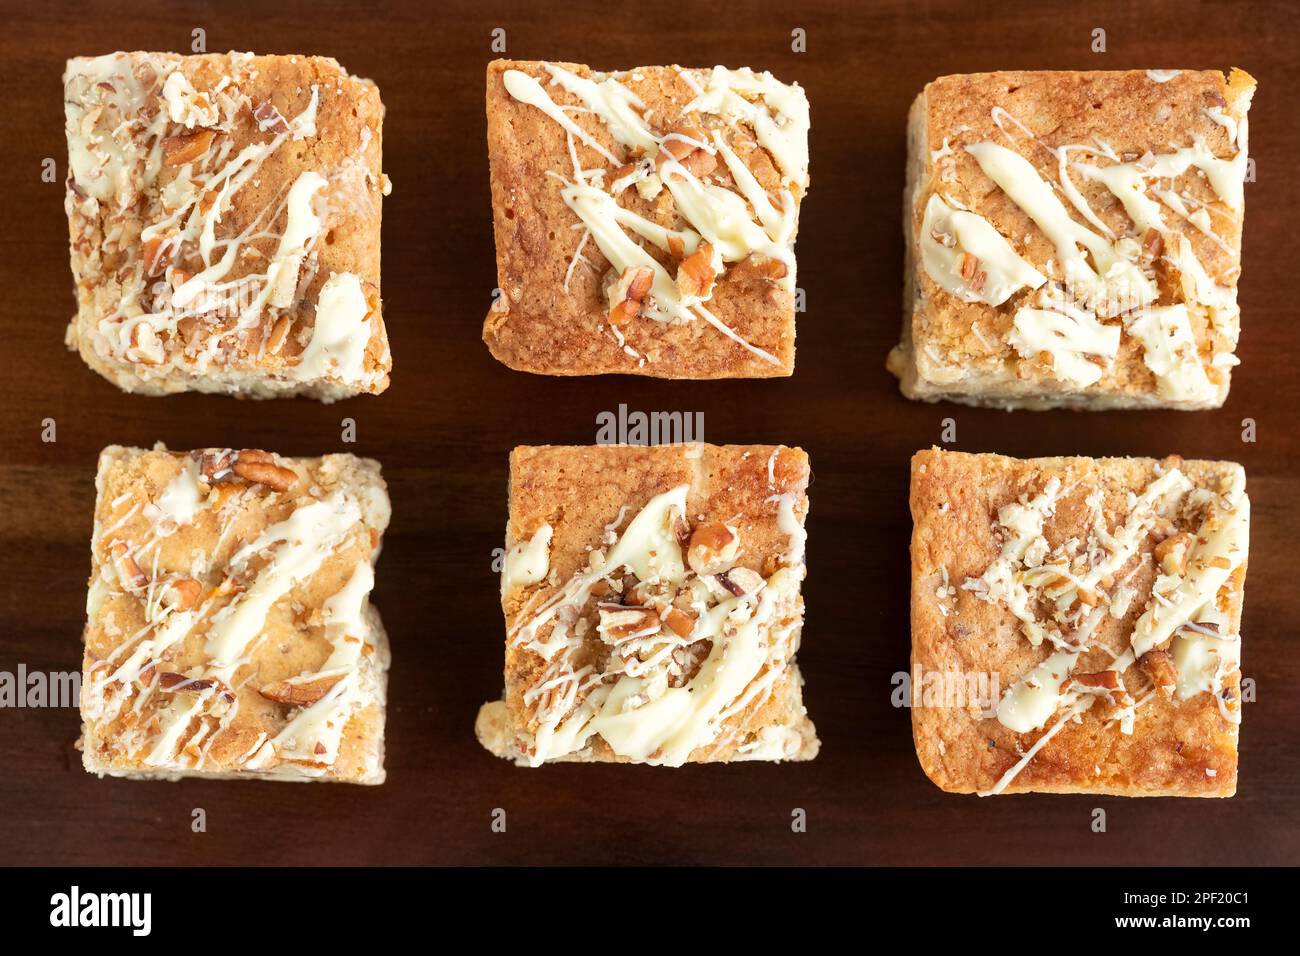 A overhead view of home baked white chocolate pecan Blondies arranged on a wooden platter. The blondies are still warm and gooey. an indulgent treat Stock Photo